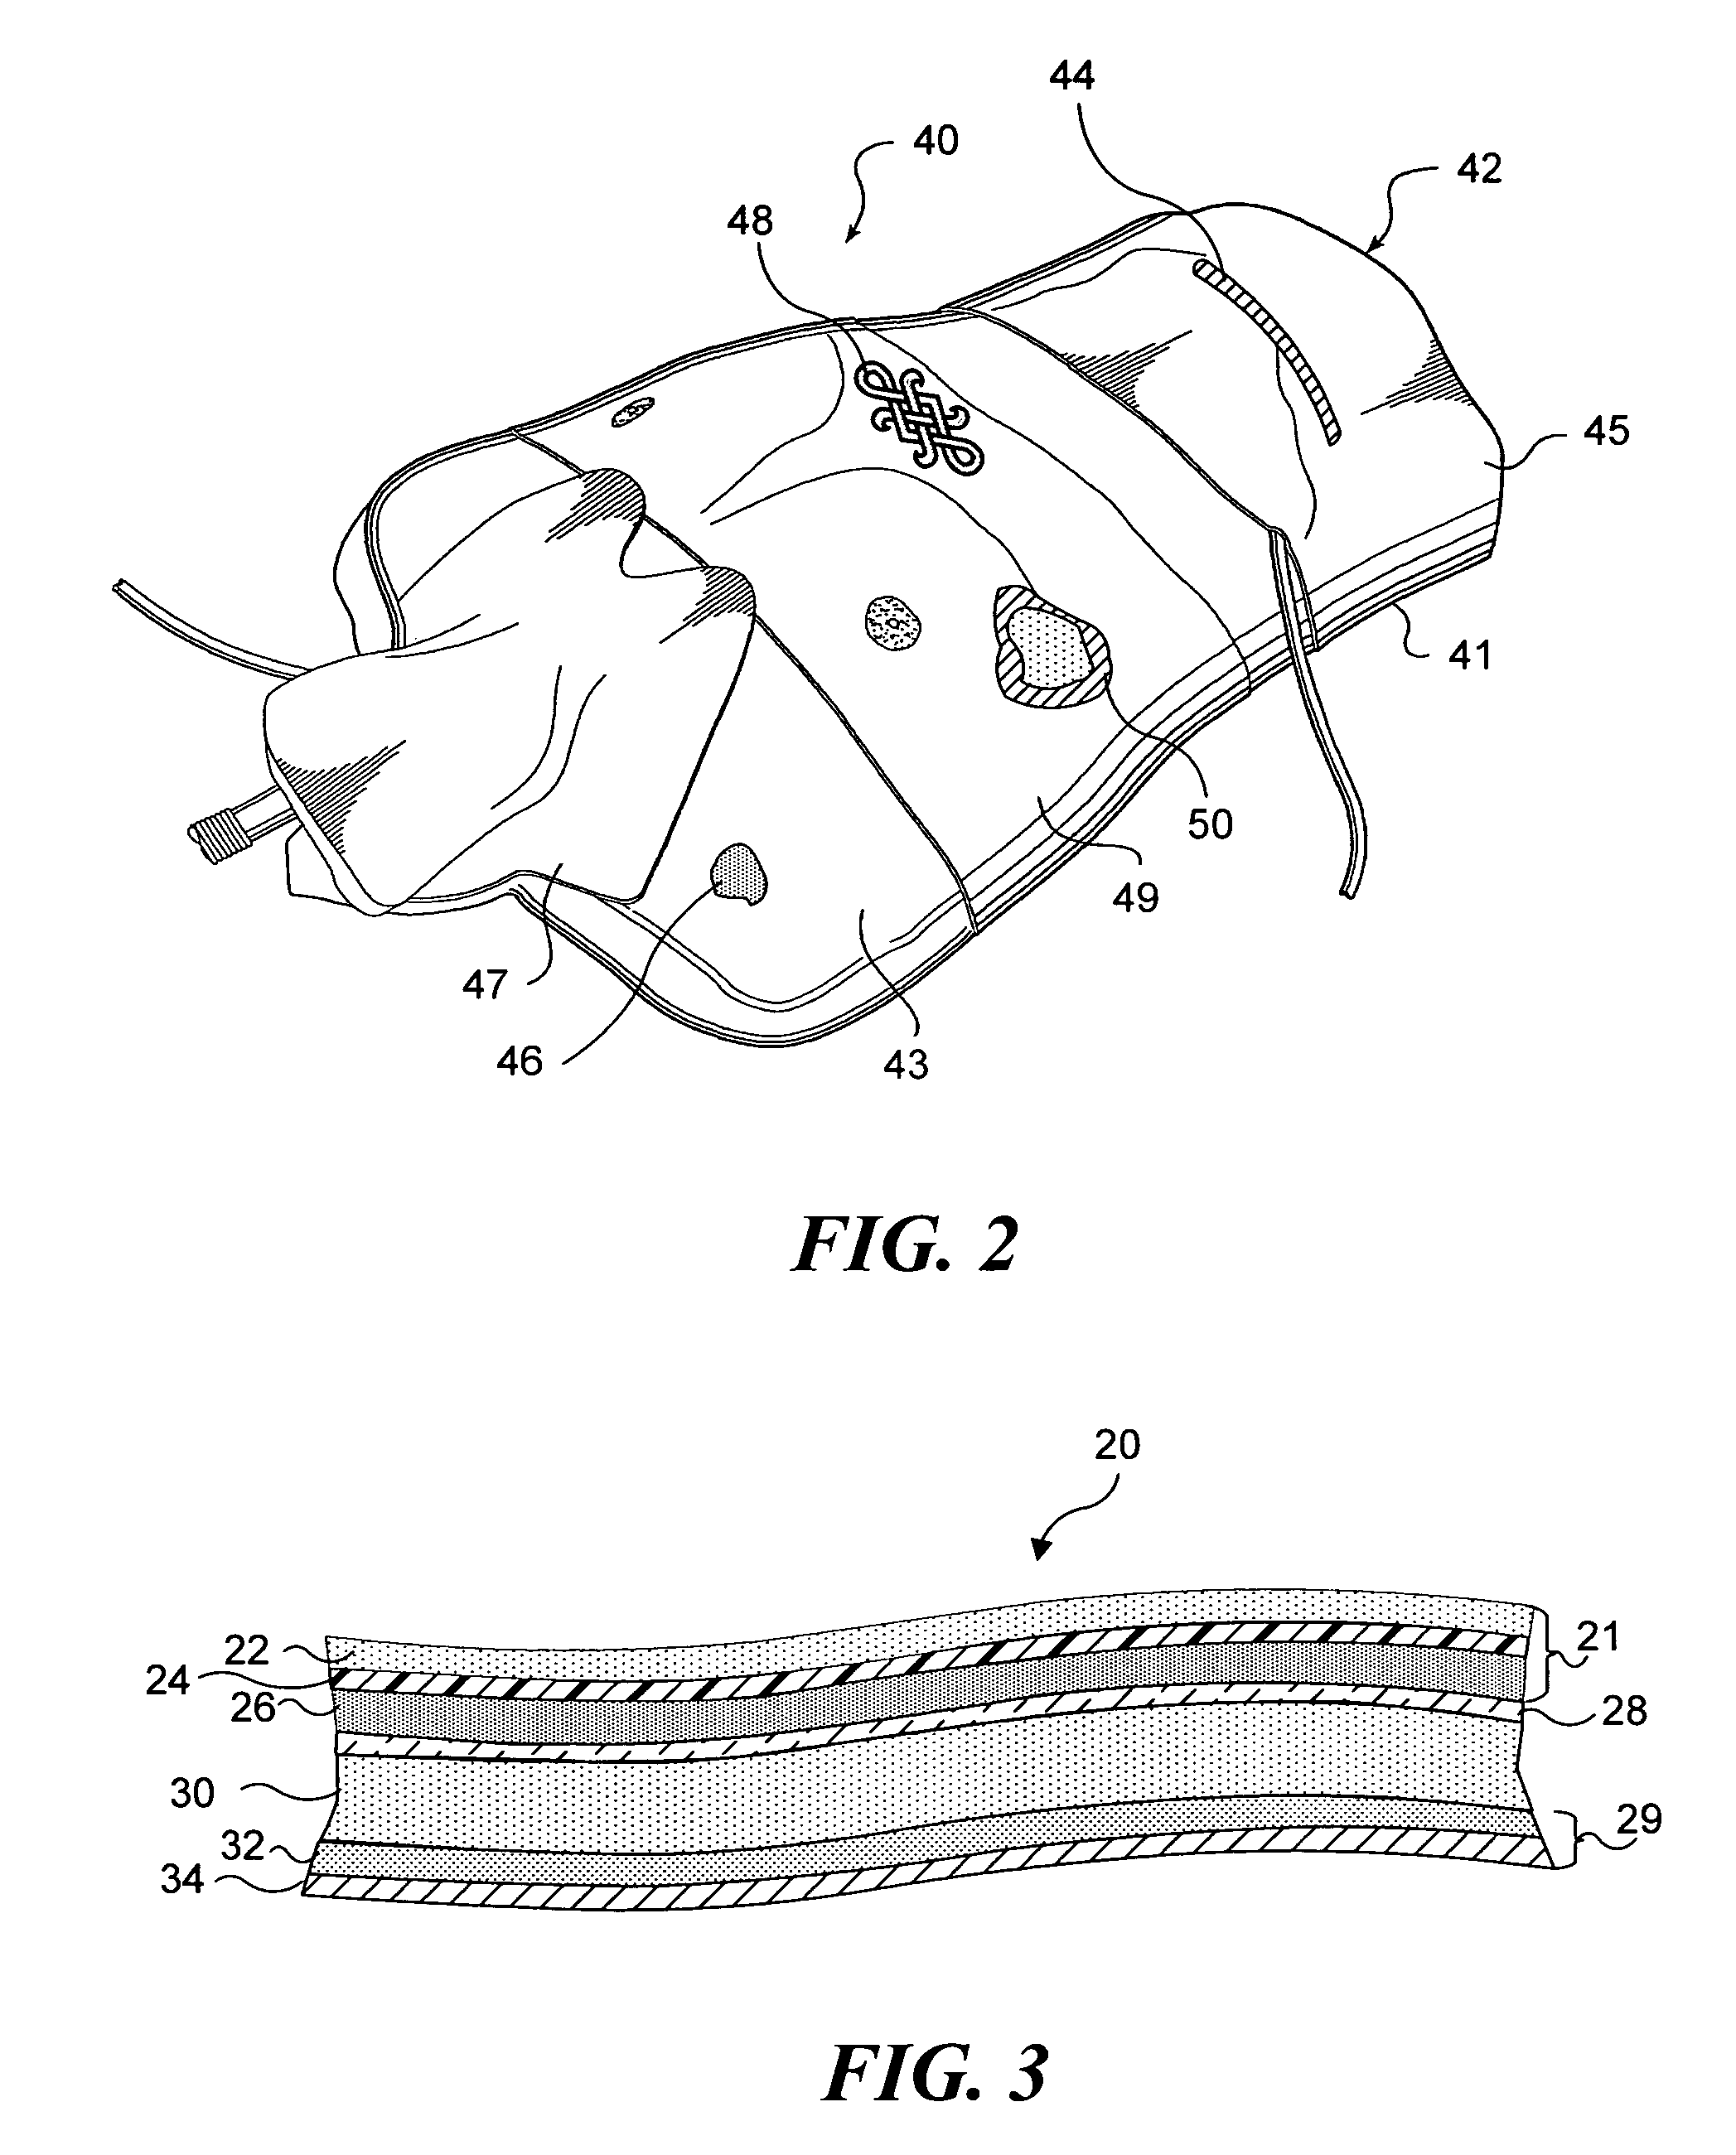 Simulated anatomical structures incorporating an embedded image layer